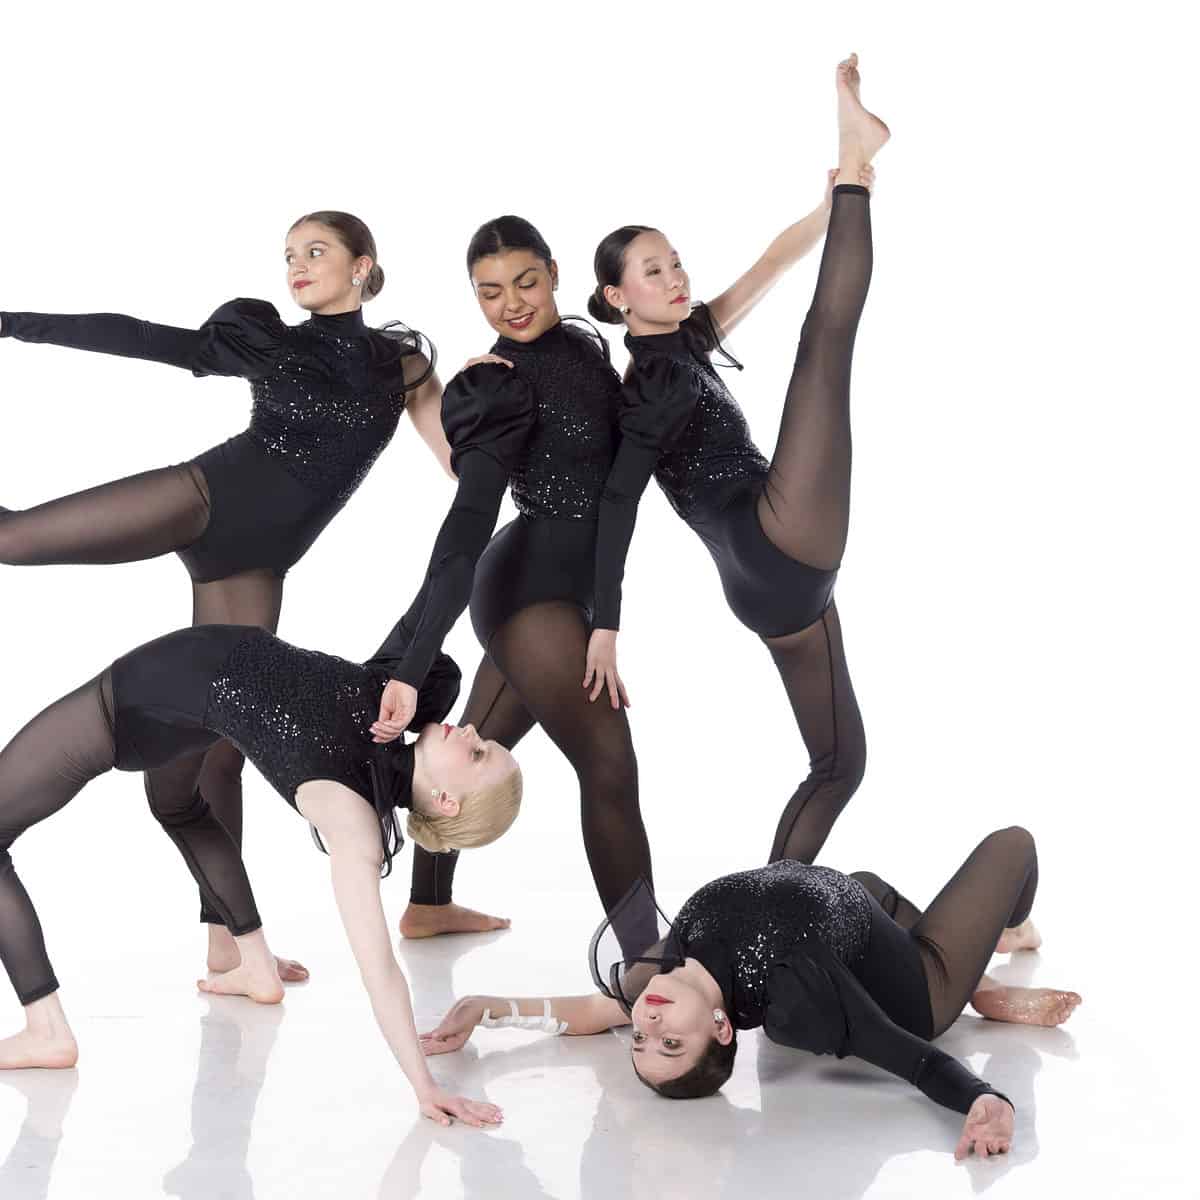 Group lyrical | Dance picture poses, Dance photography poses, Dance pictures